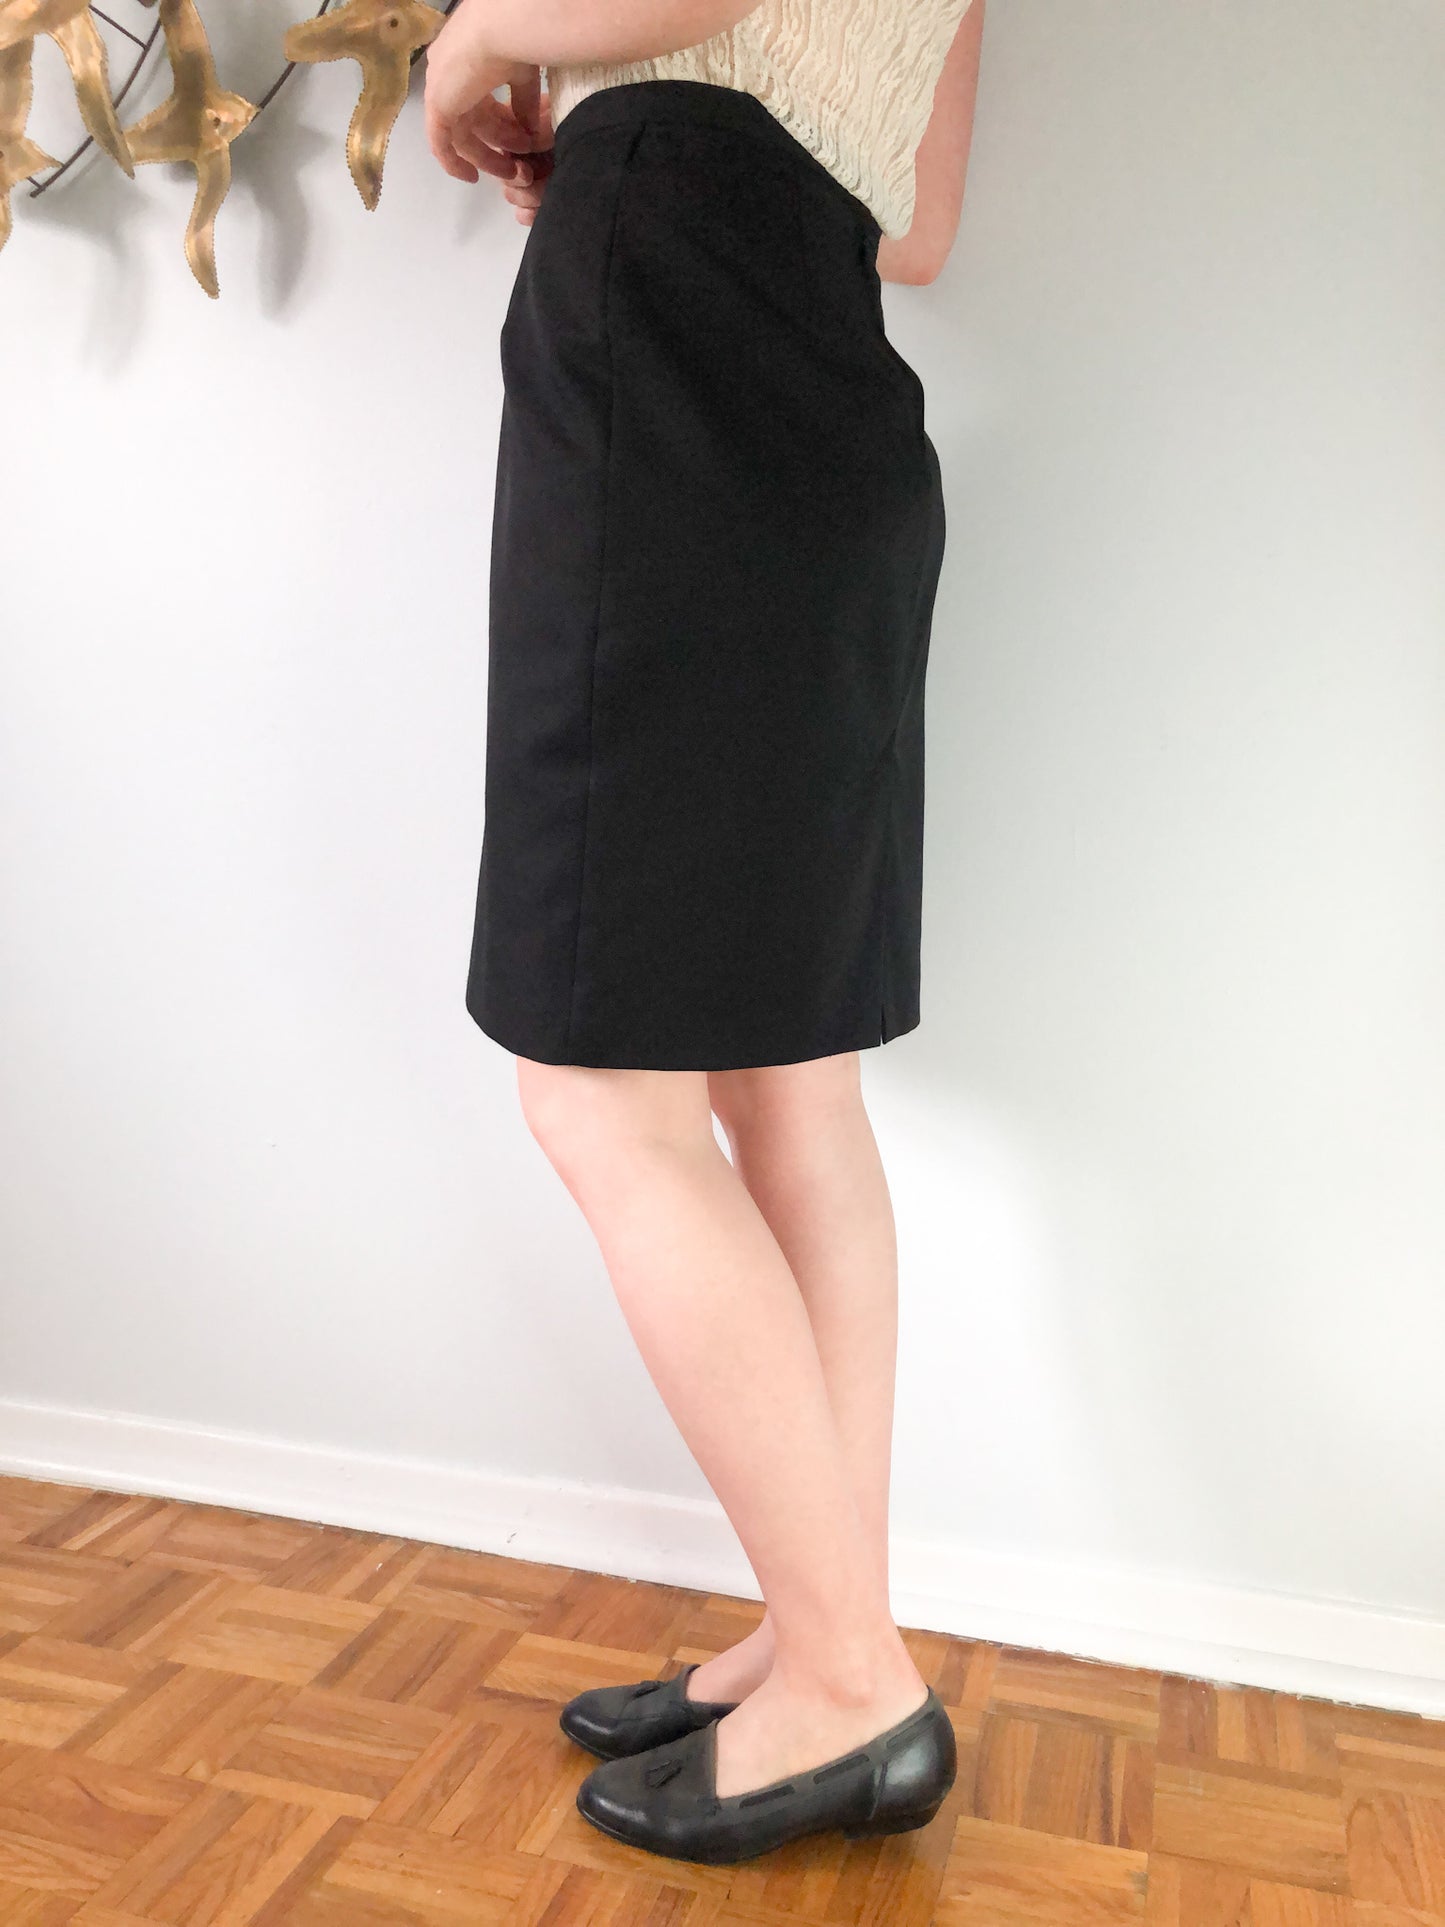 Vintage Classique Collections Black High Waist Pencil Skirt - Small